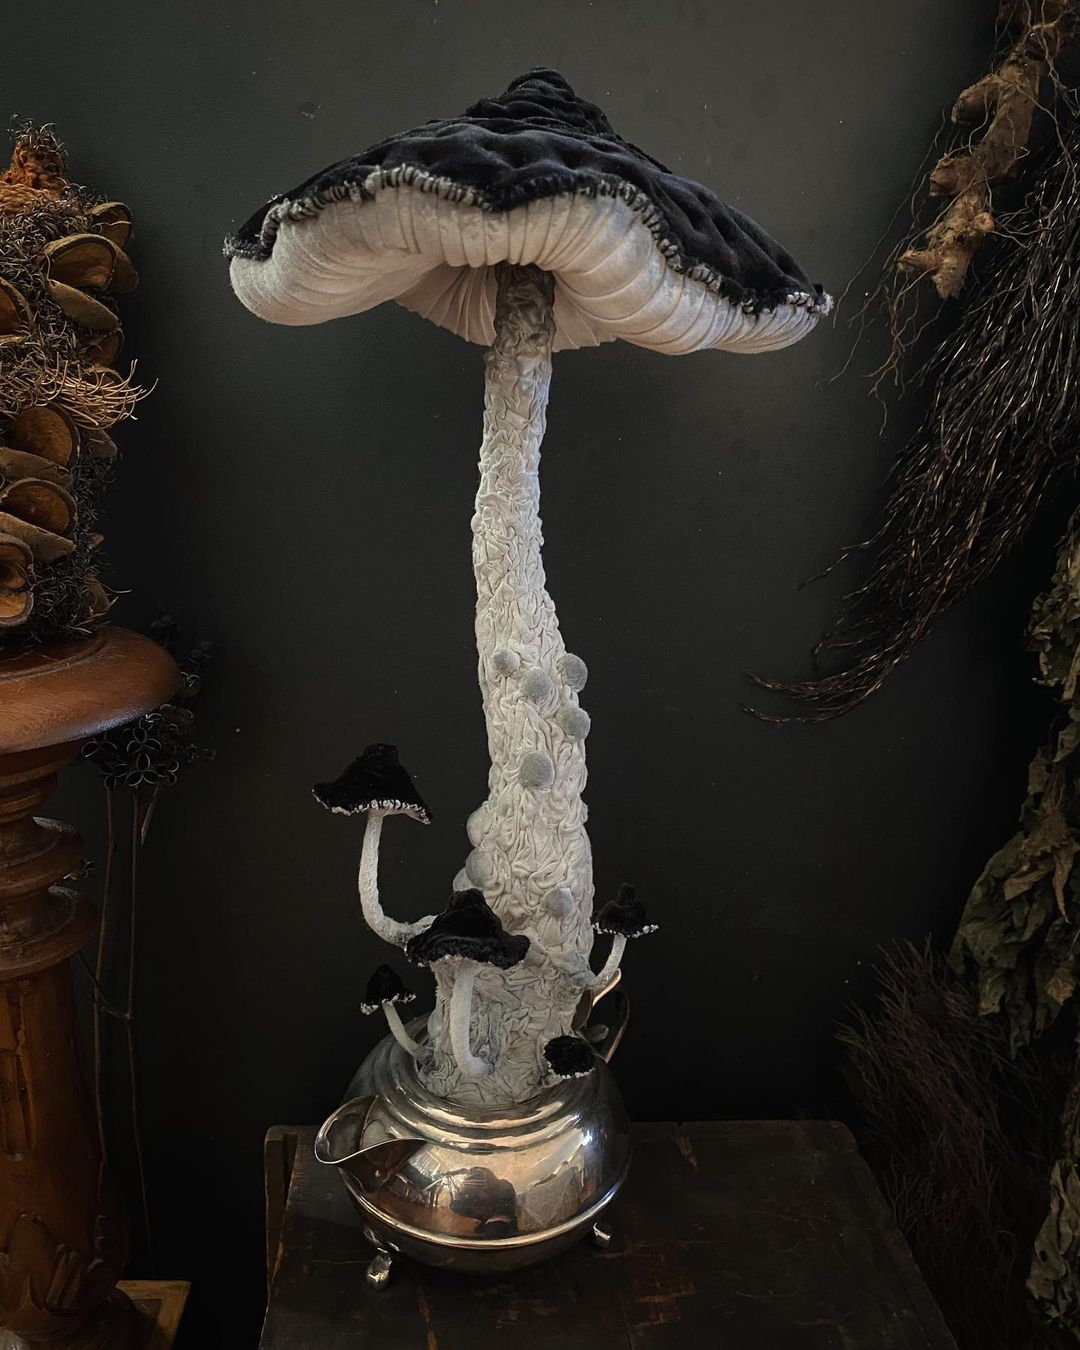 Witchy Mushrooms The Beautifully Nature Inspired Textile And Fiber Art Of Adrianna Eve 11